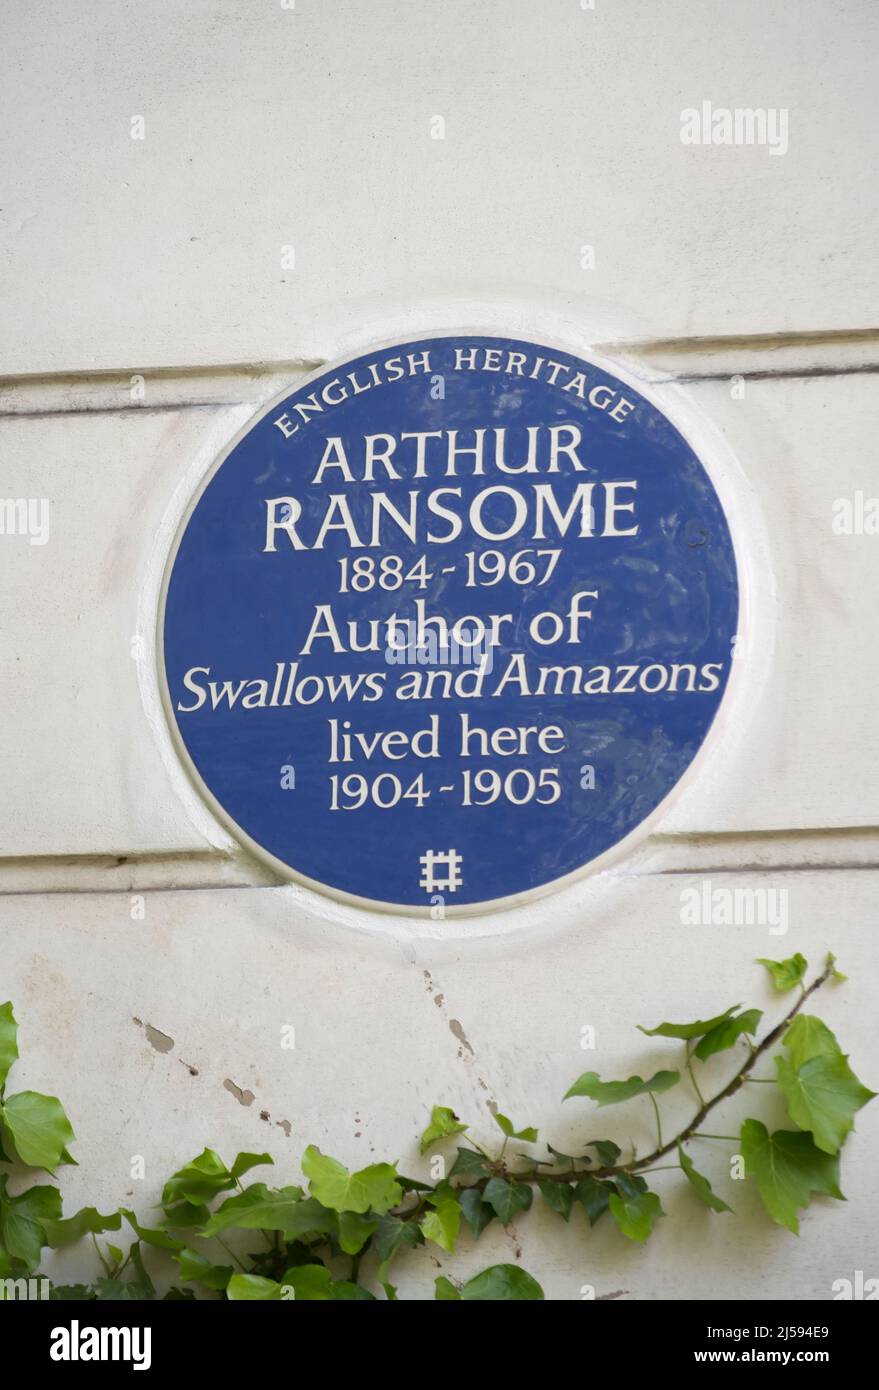 english heritage blue plaque marking a home of writer arthur ransome, author of swallows and amazons, london, england Stock Photo